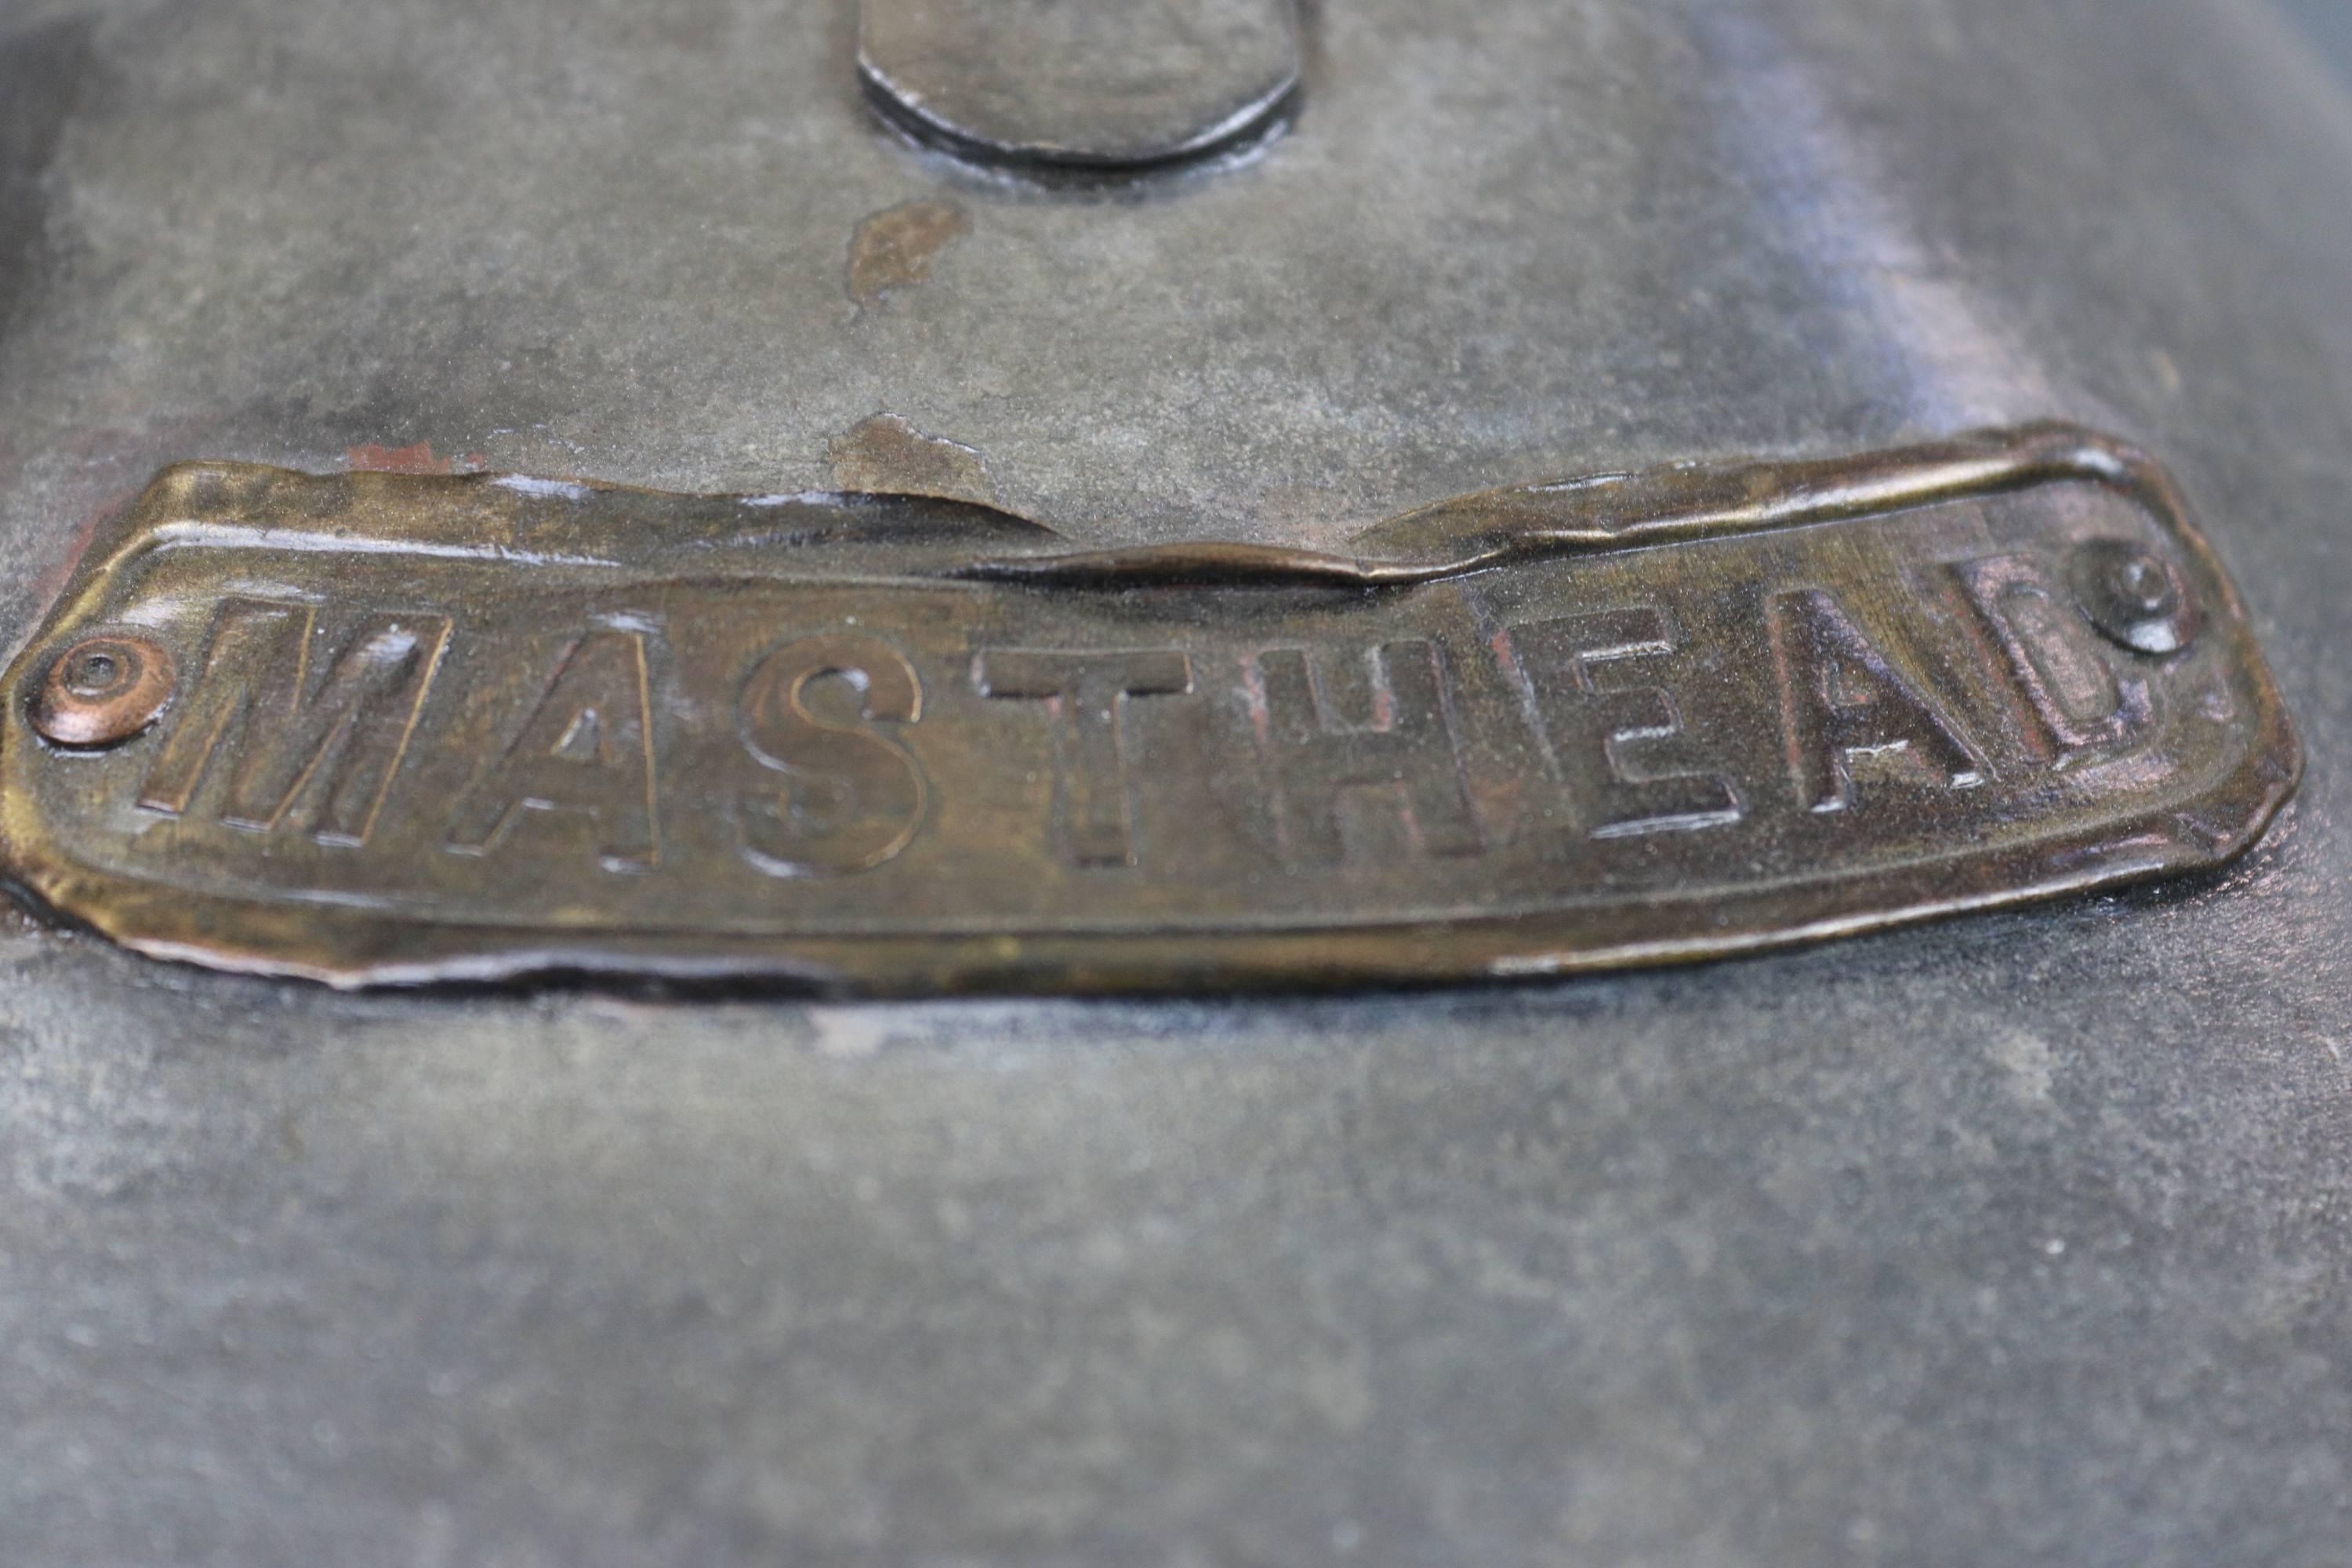 Ship's masthead lantern by Seahorse of Great Britain. With thick fresnel glass lens. Brass badge with Seahorse logo.